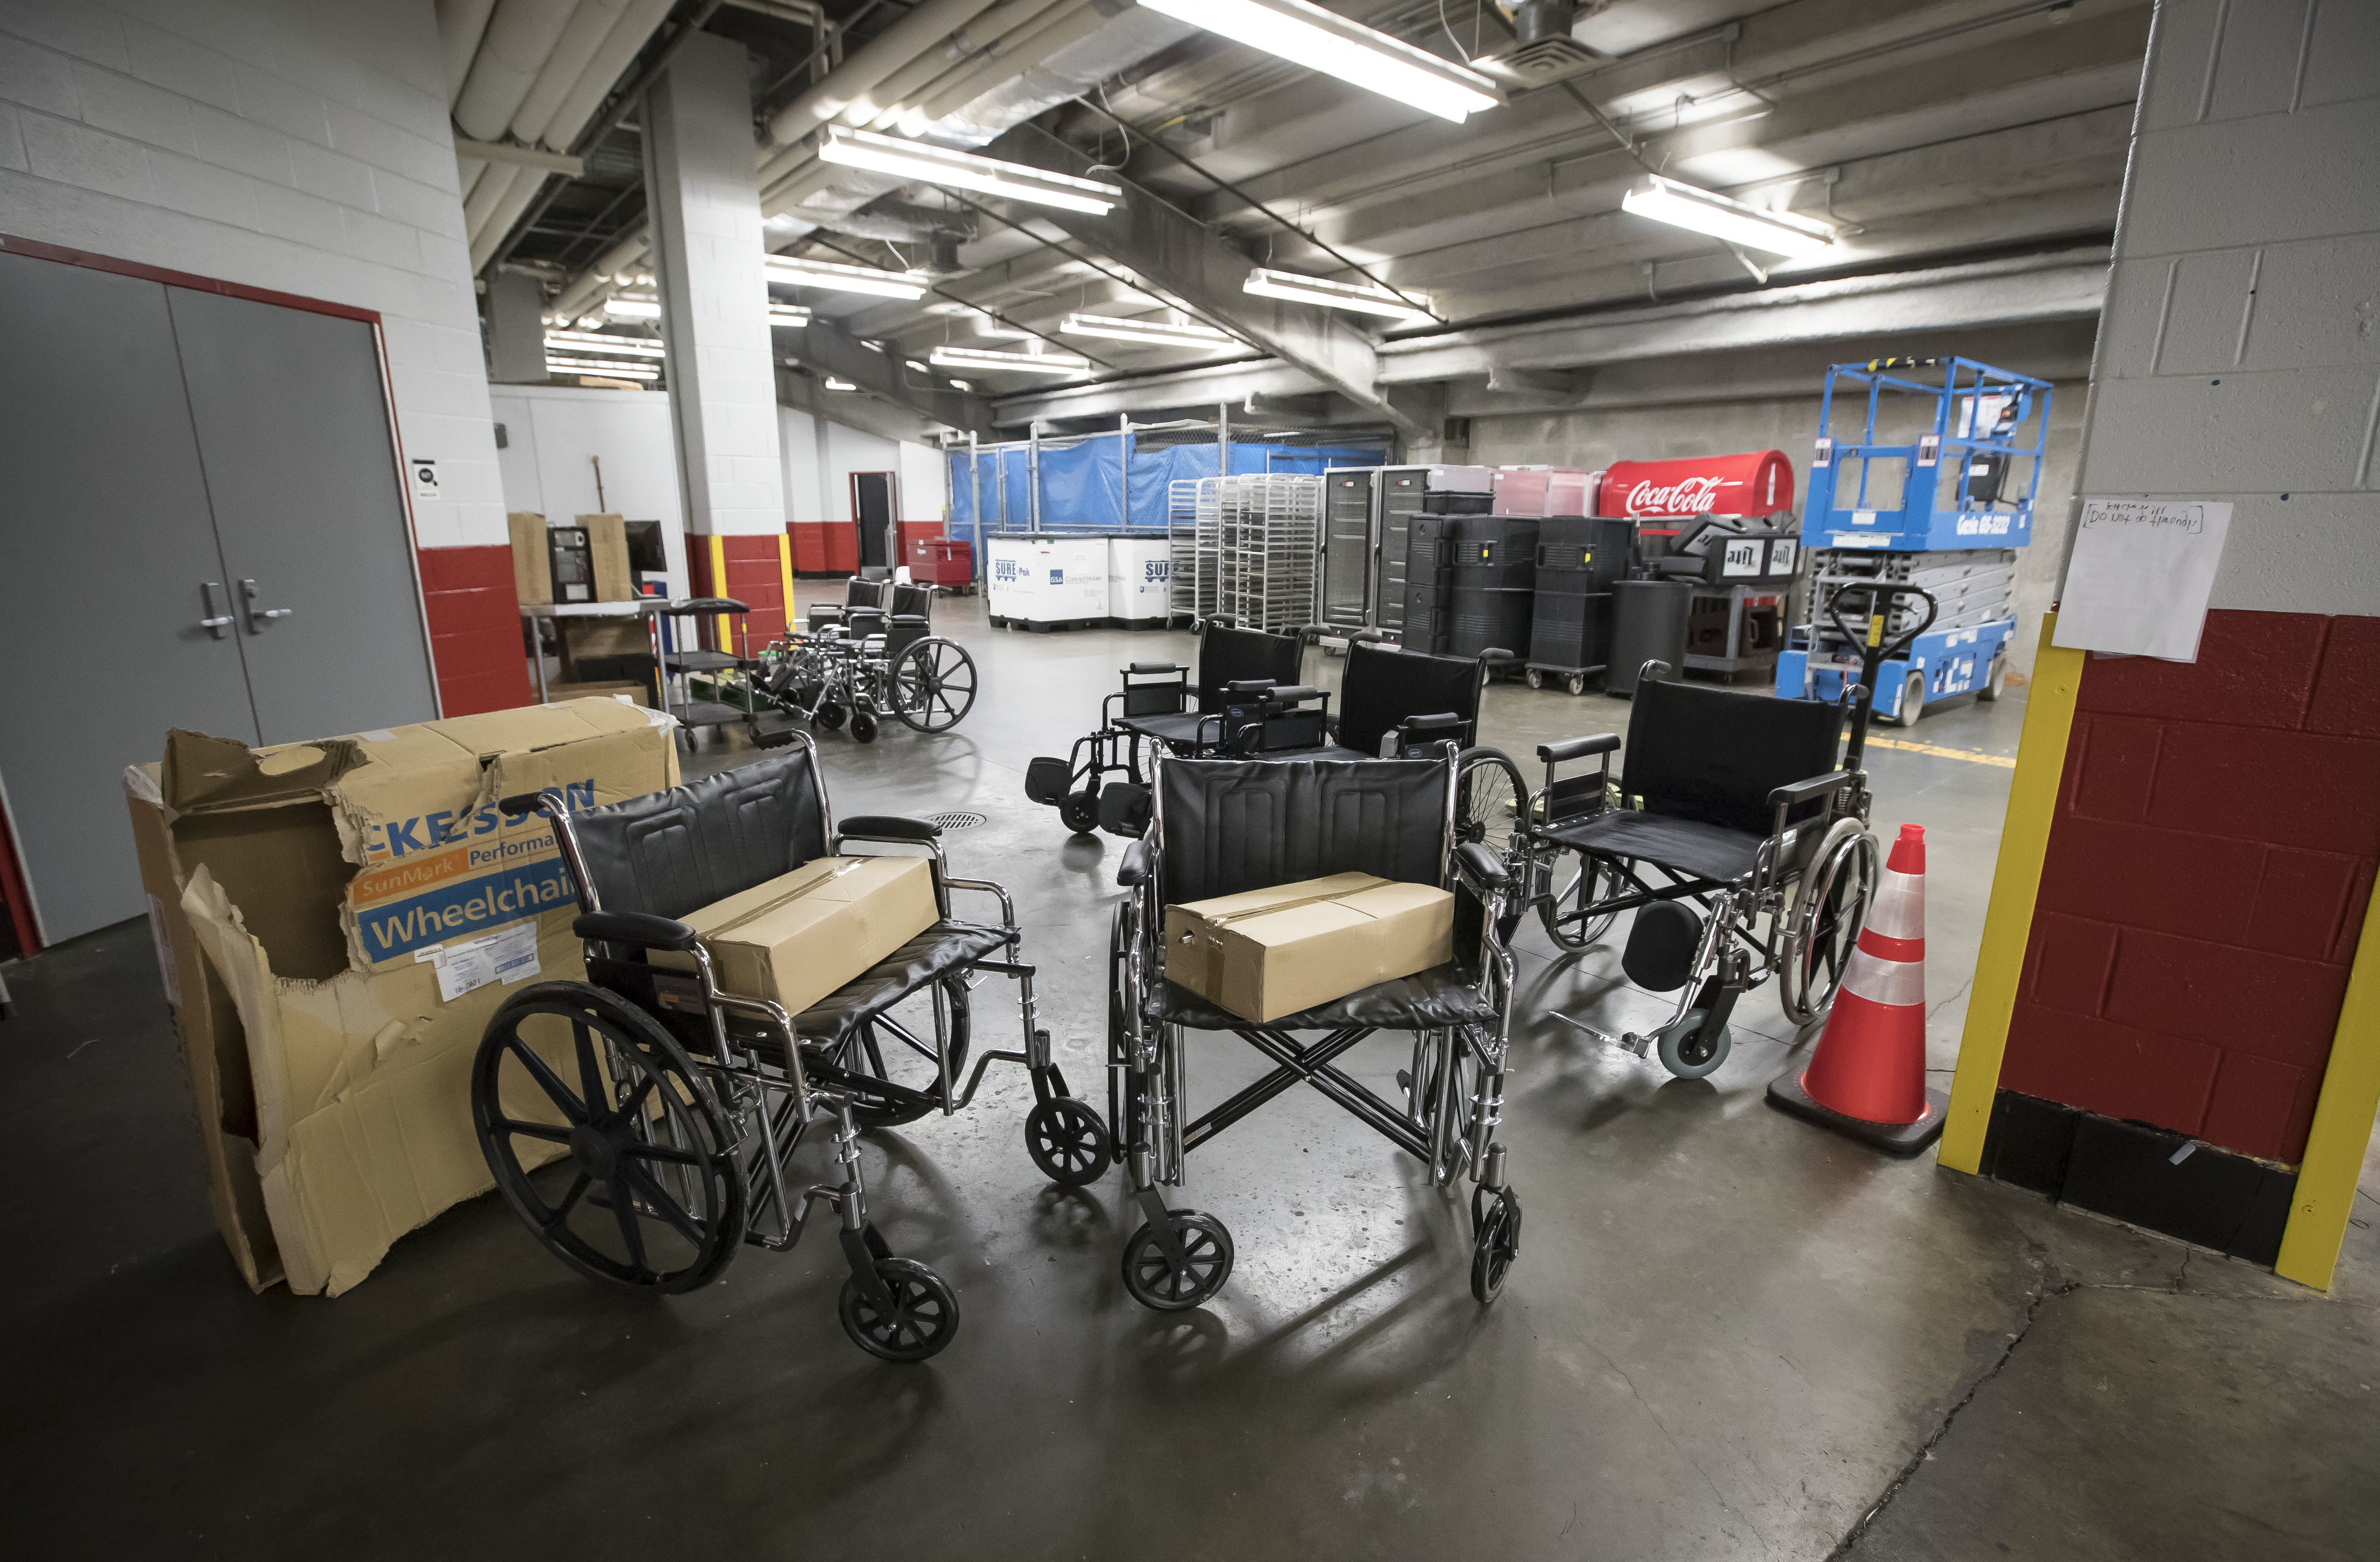 Wheelchairs and boxes of supplies that will be used to help treat patients